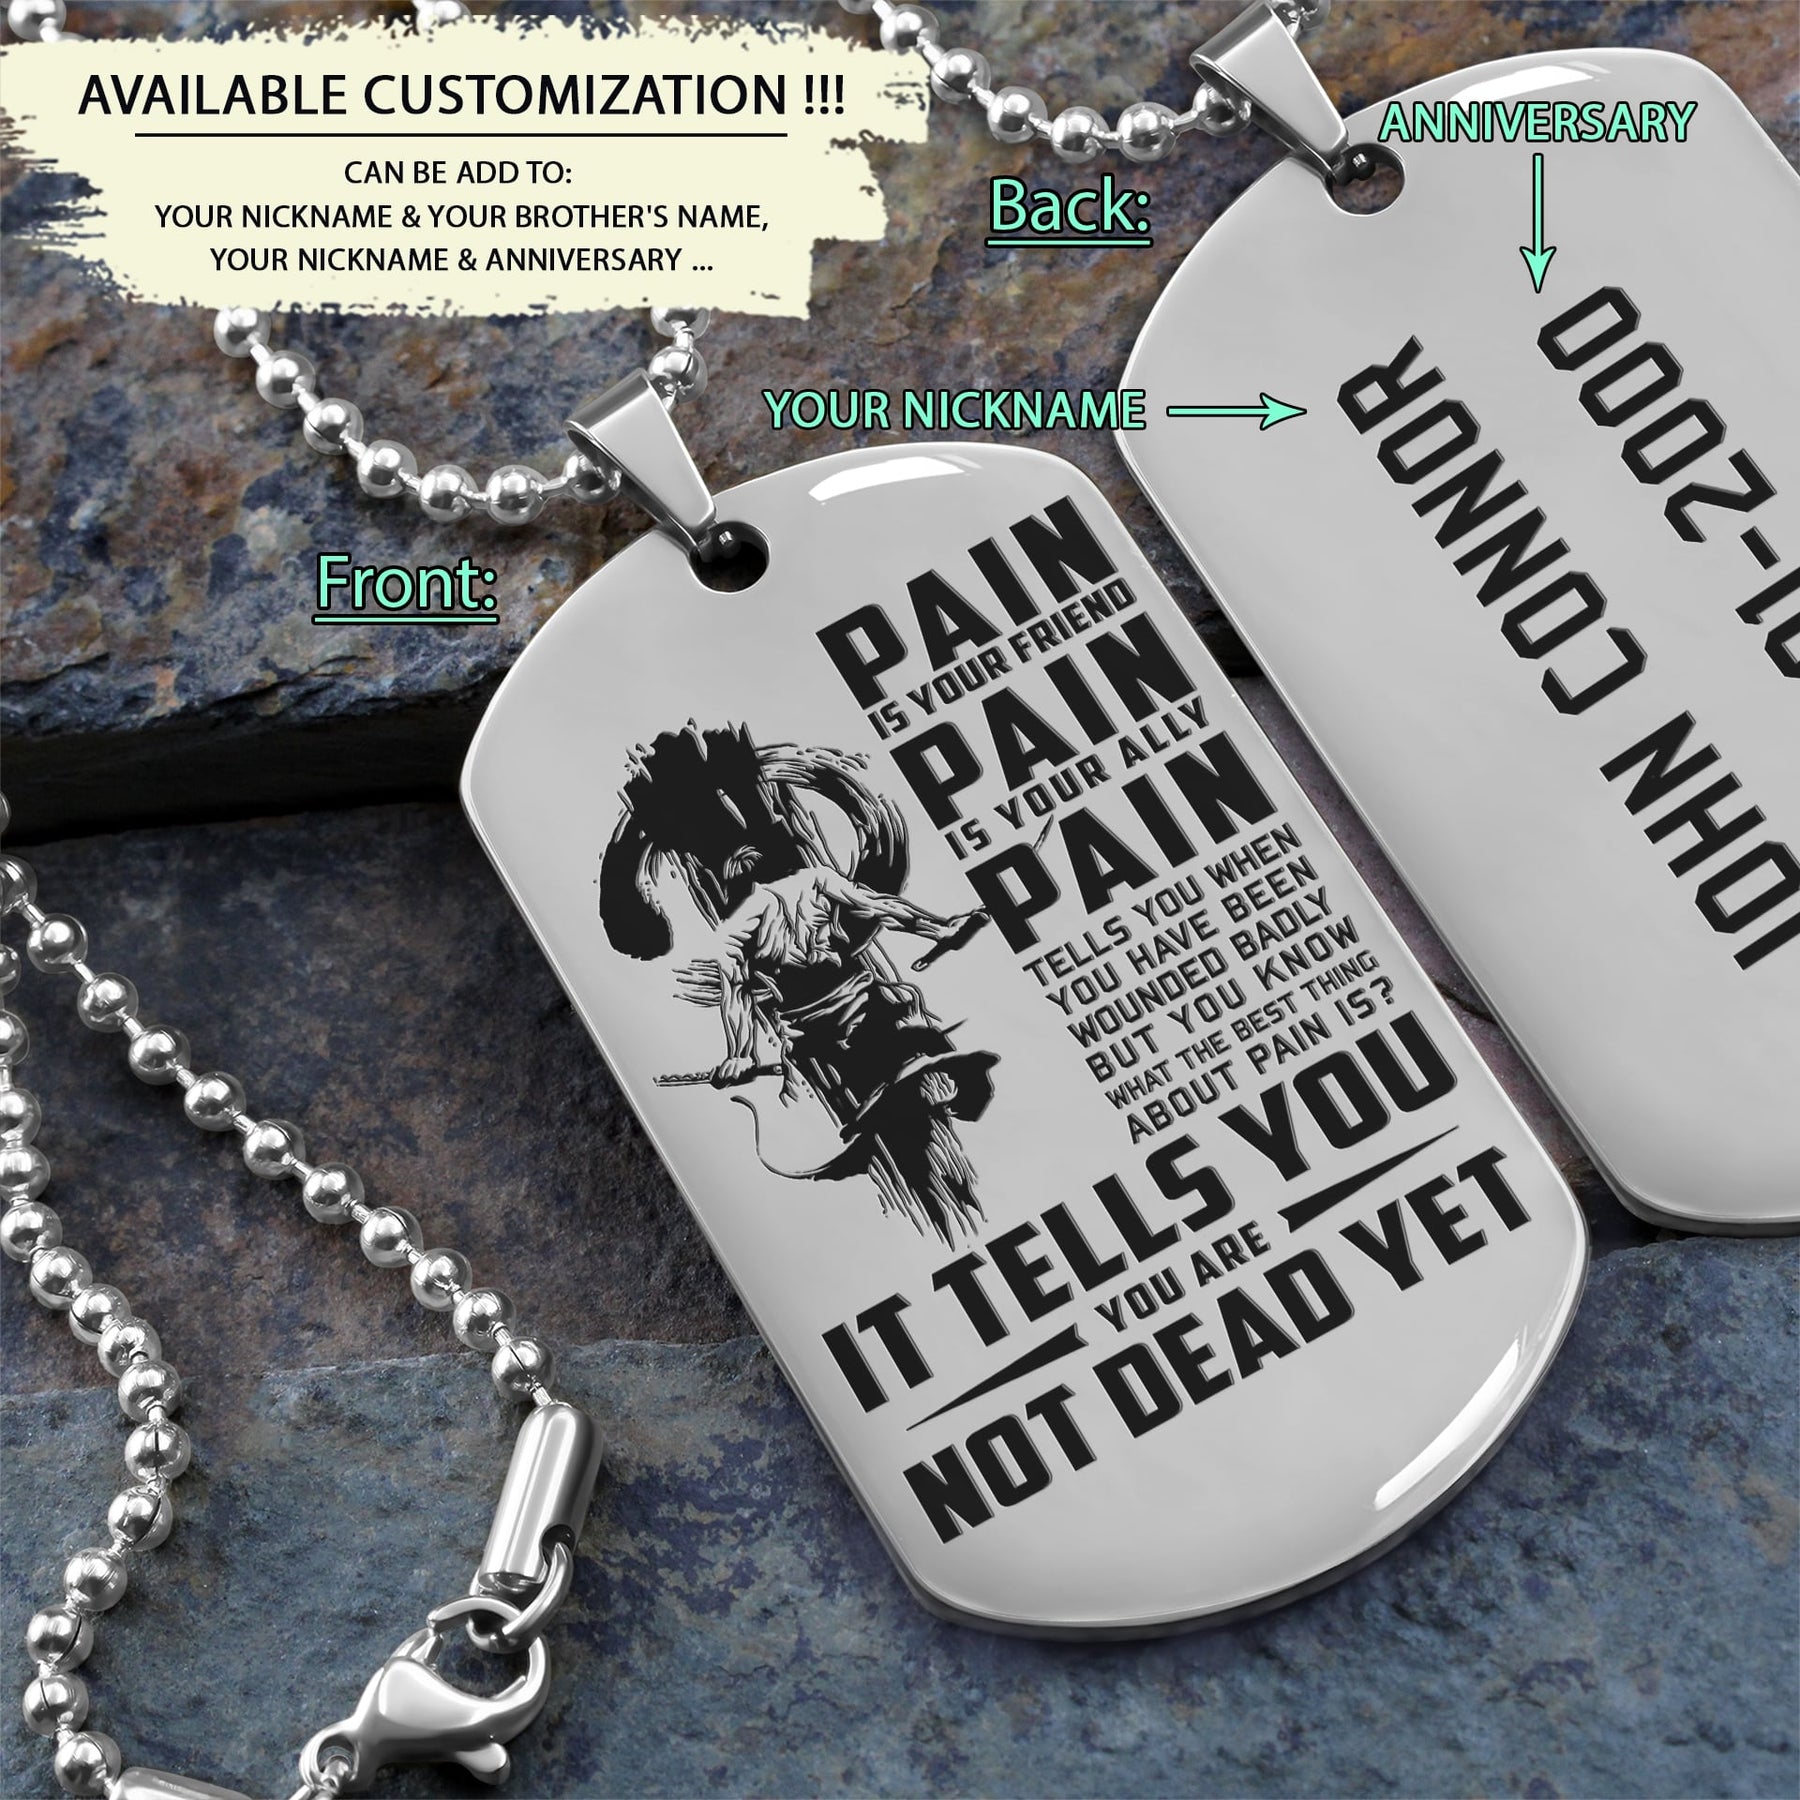 SAD004 - PAIN - You Are Not Dead Yet - Samurai - Engrave Silver Dog Tag